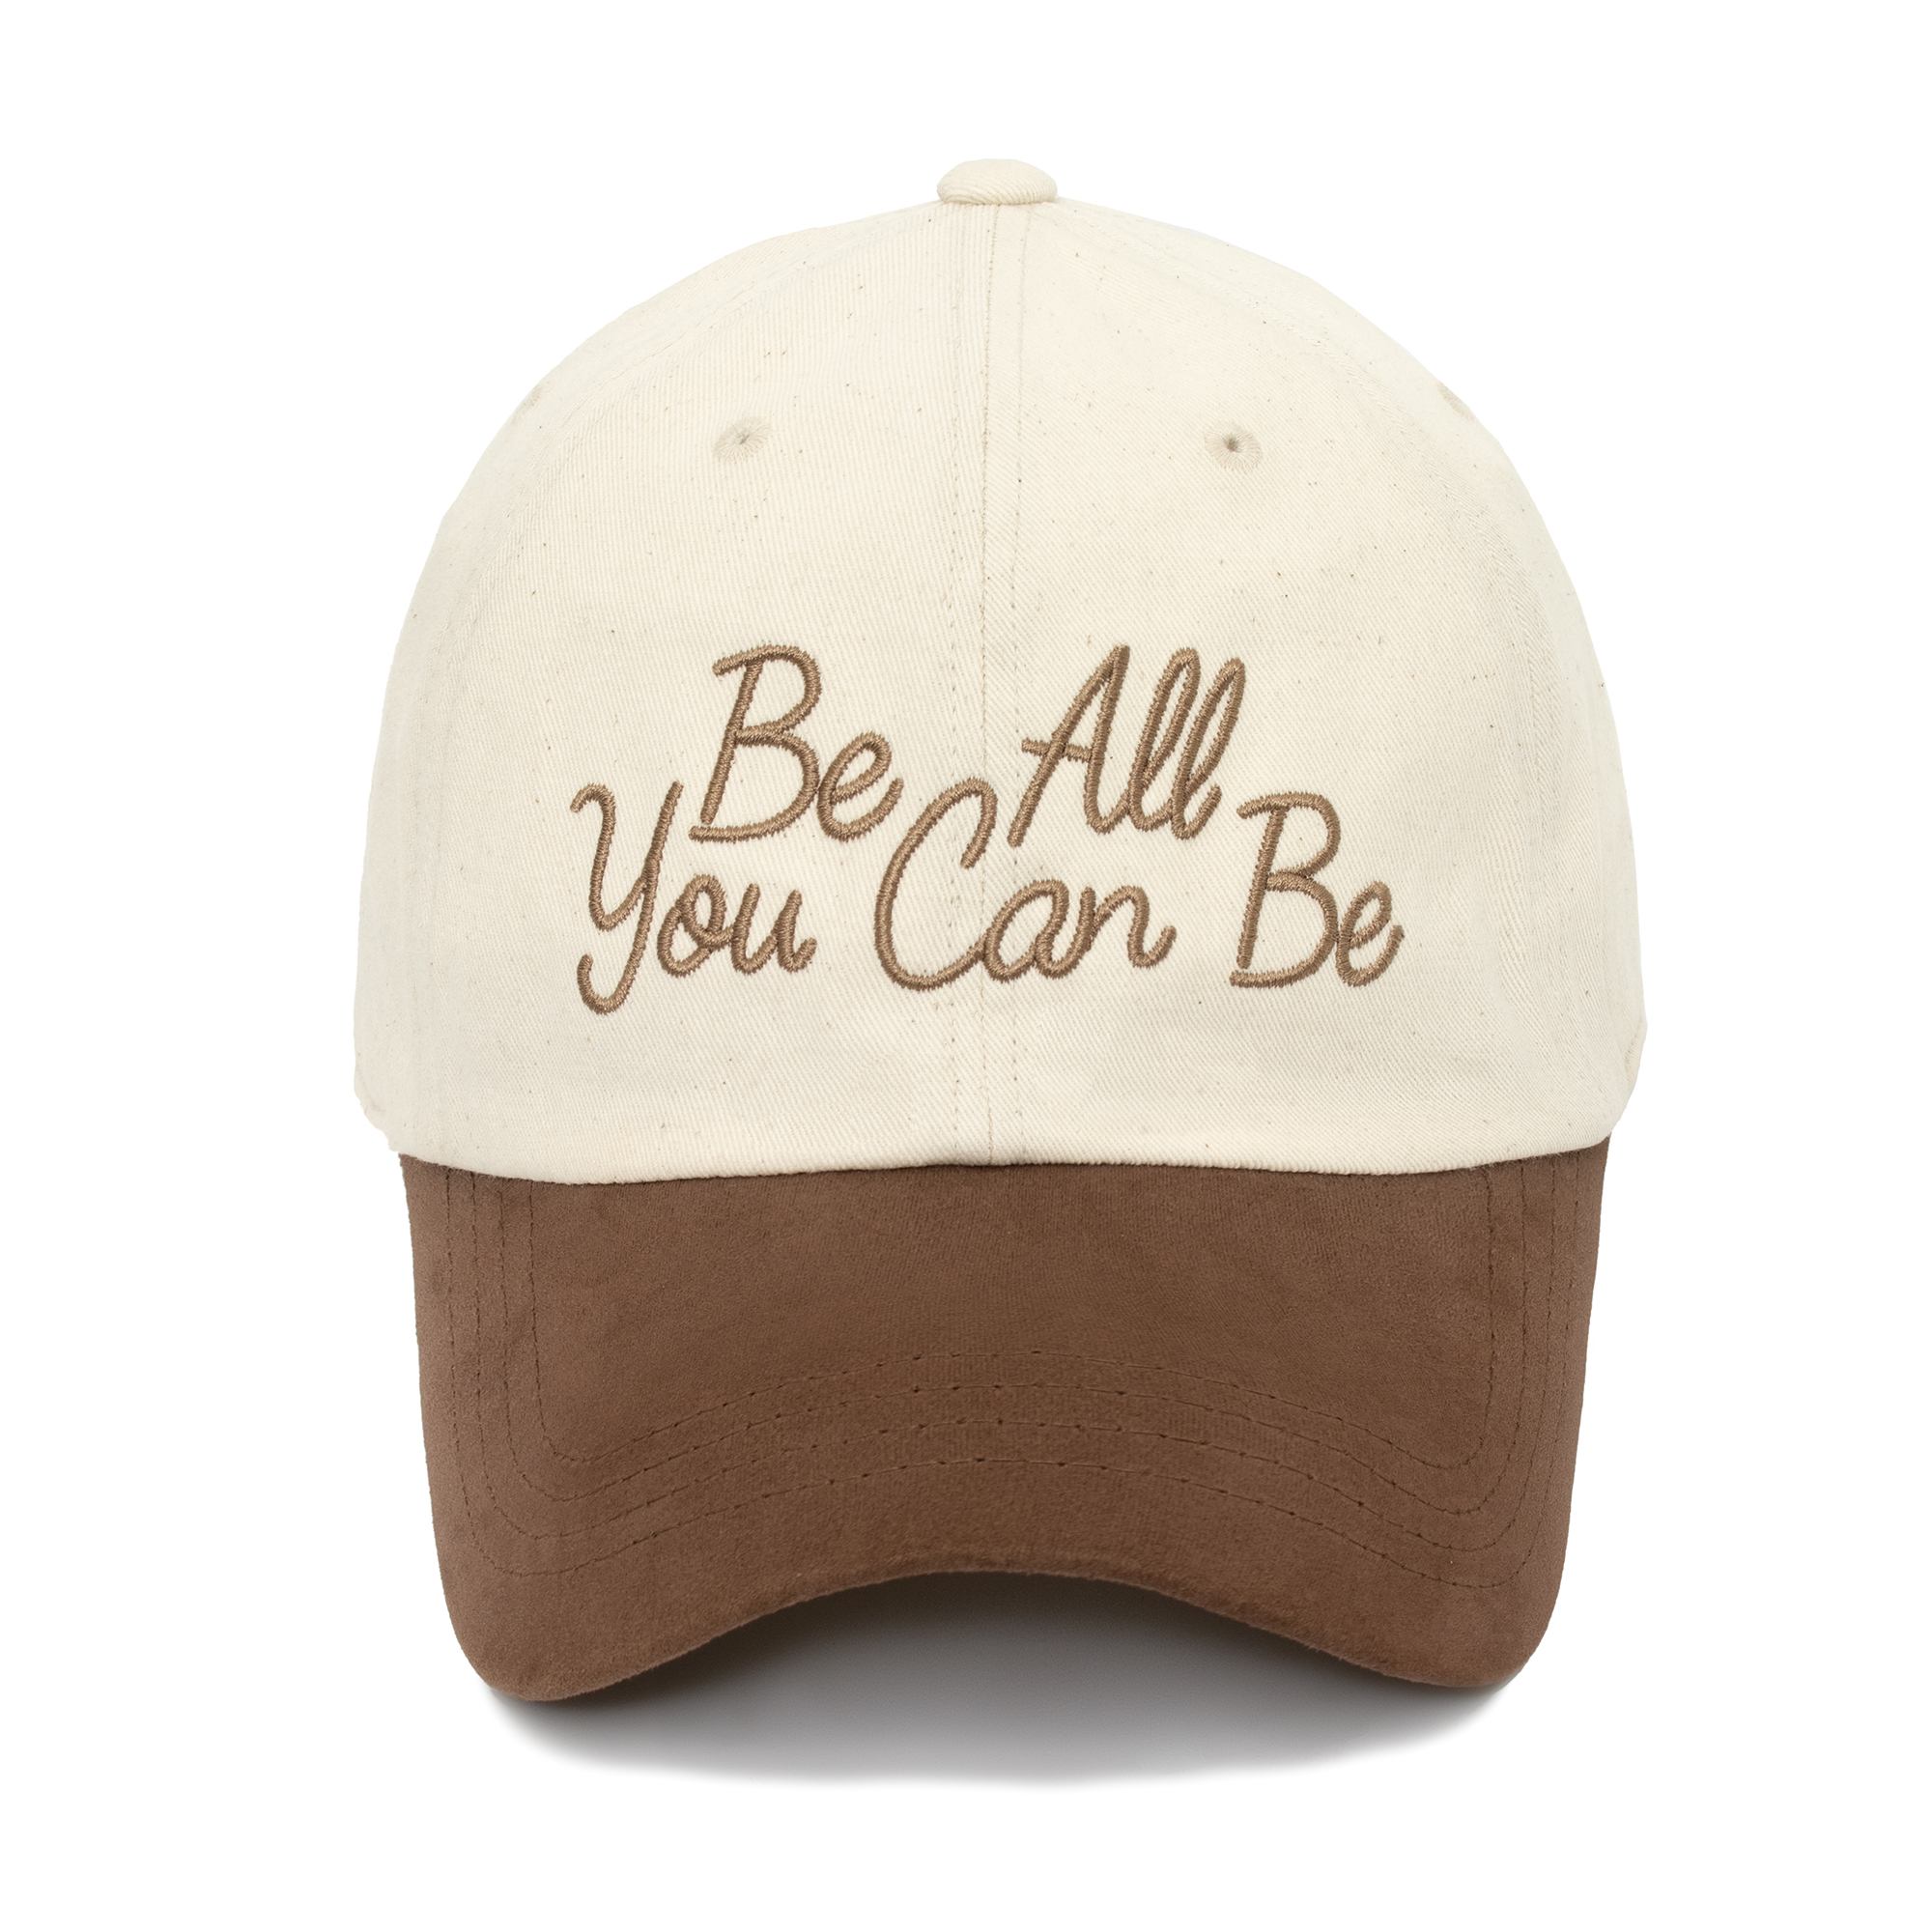 HW-BC164 : “Be All You Can Be” Suede Brim CapㅣIvory Brown